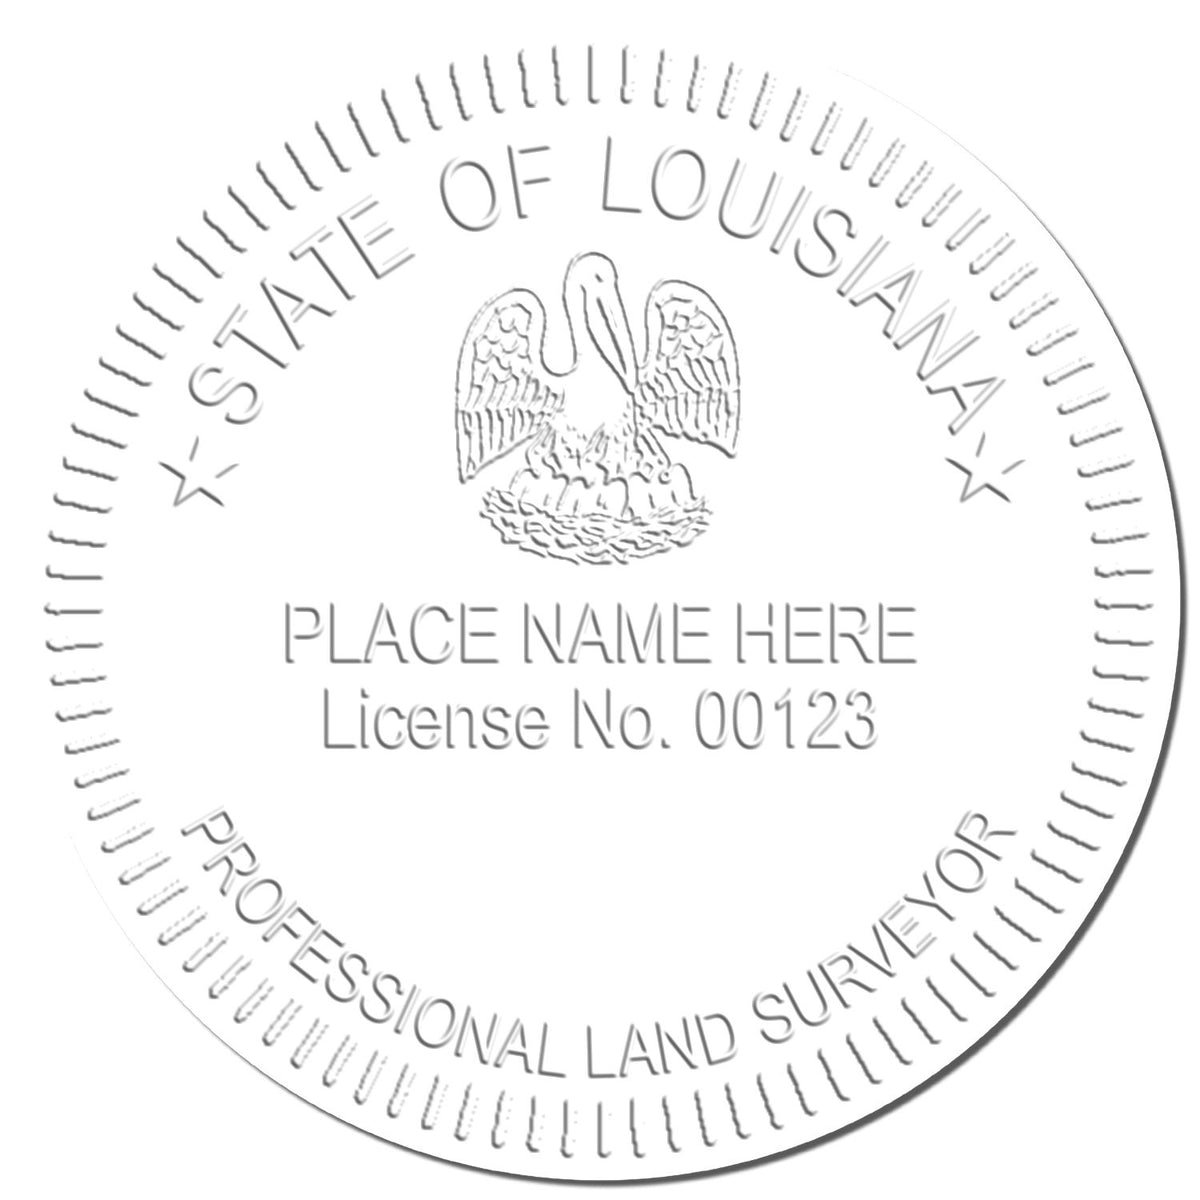 This paper is stamped with a sample imprint of the Handheld Louisiana Land Surveyor Seal, signifying its quality and reliability.